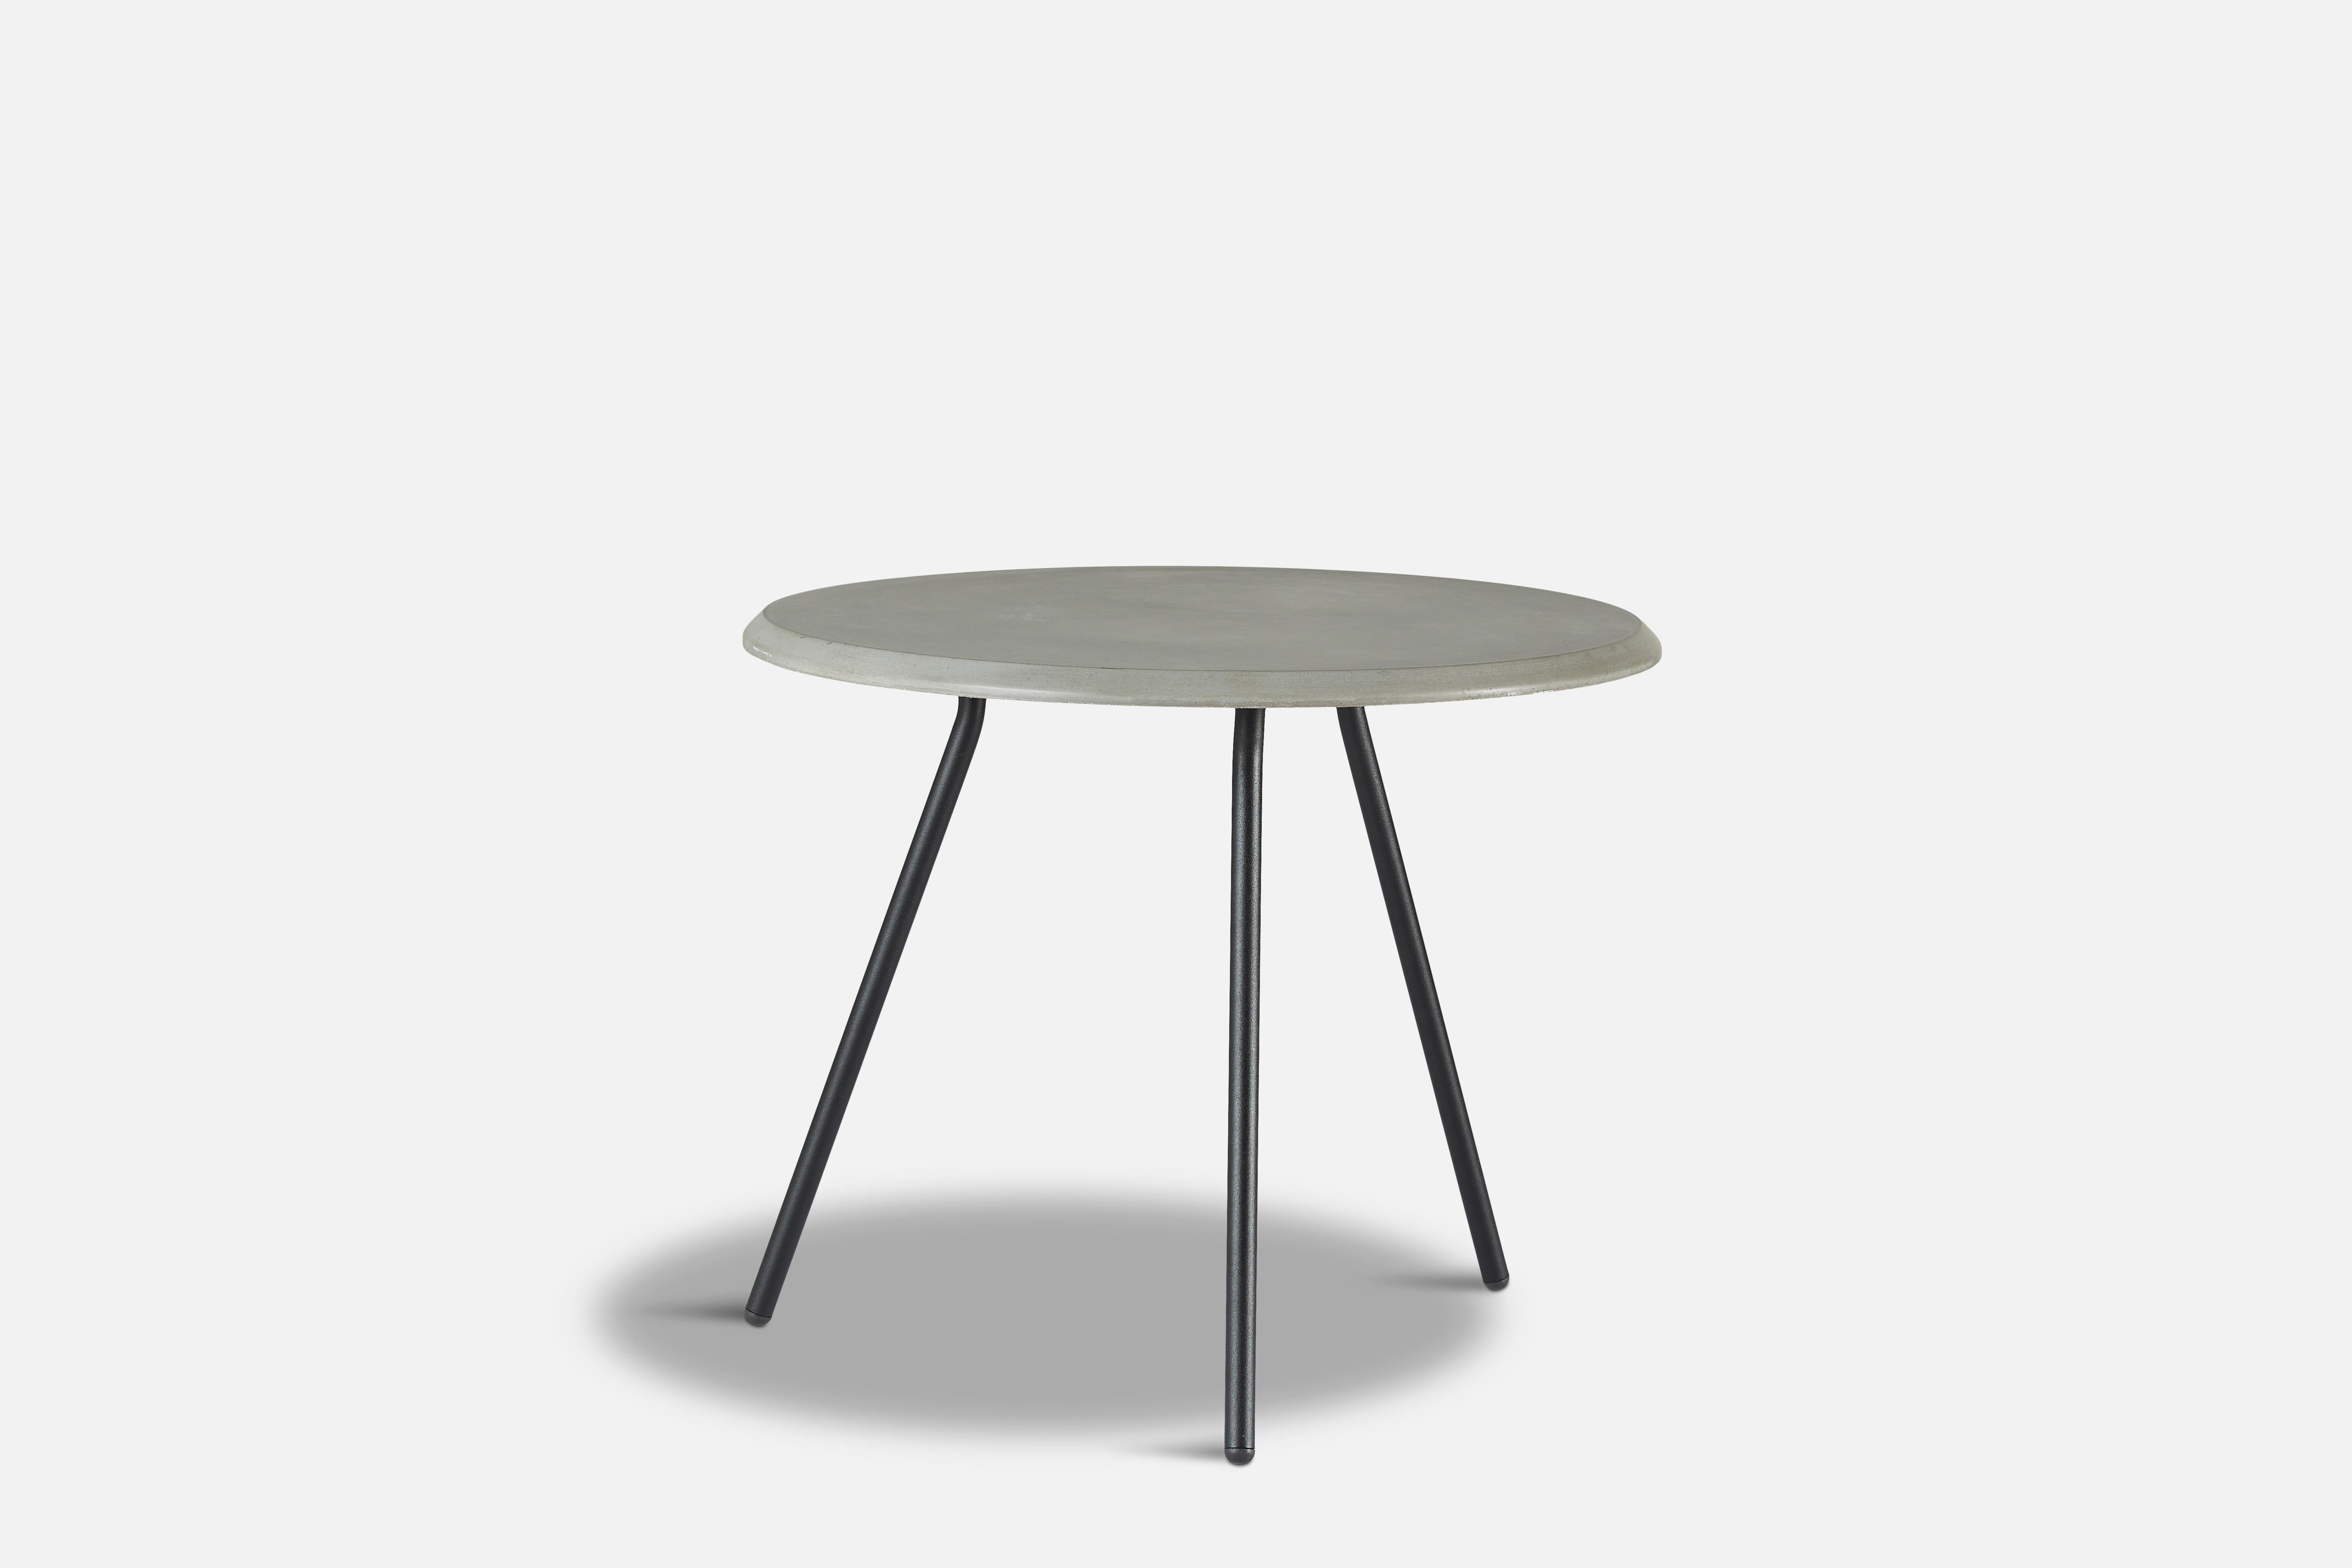 Concrete Soround coffee table 60 by Nur Design
Materials: metal, fibre concrete 
Dimensions: D 60 x W 60 x H 49 cm
Also available in different sizes and materials: nano laminate, ash, fibre concrete. 

The founders, Mia and Torben Koed, decided